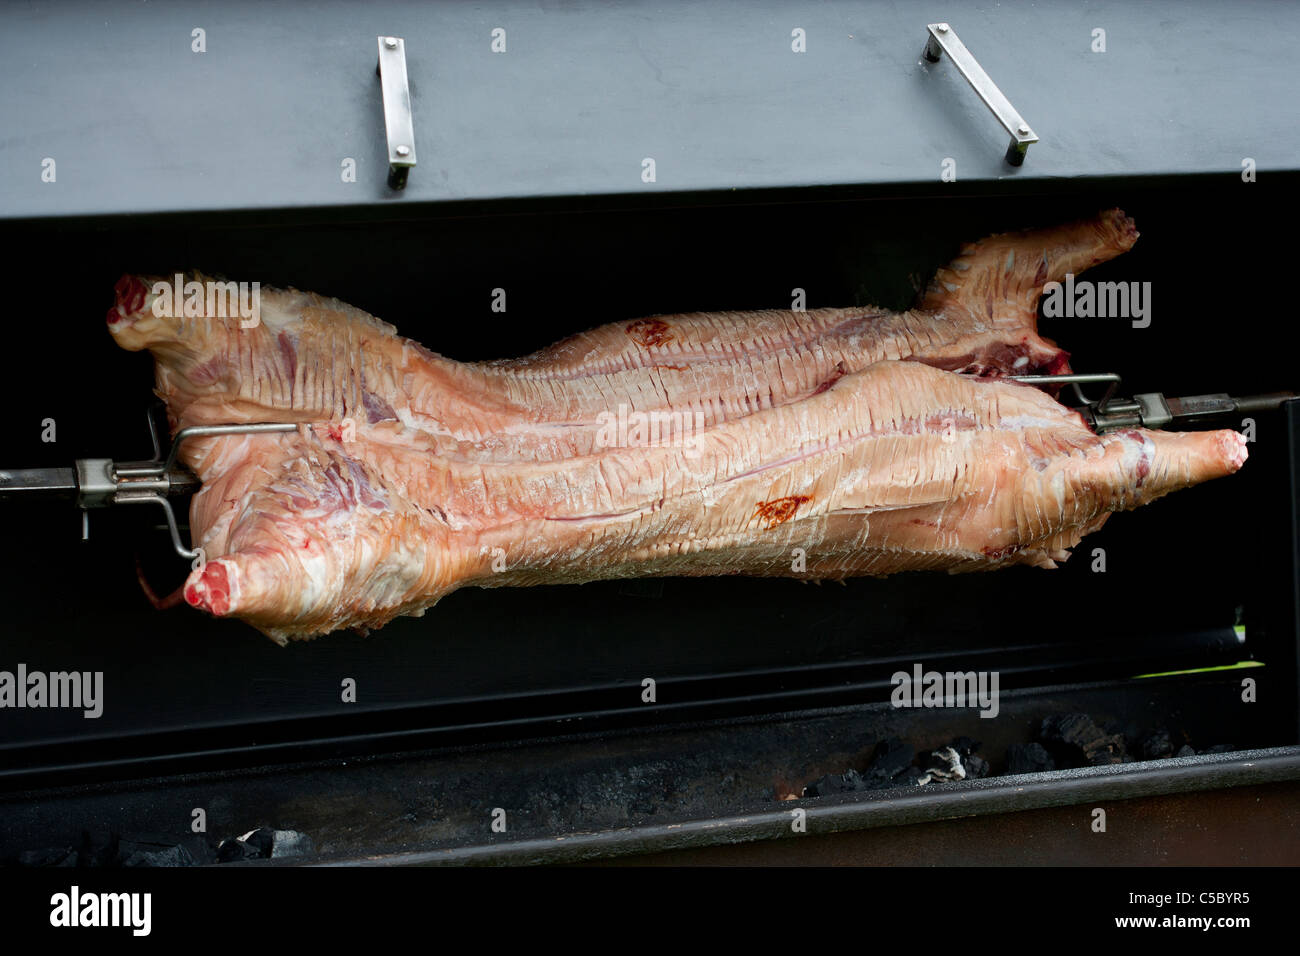 Hog roast cooking on a spit Stock Photo